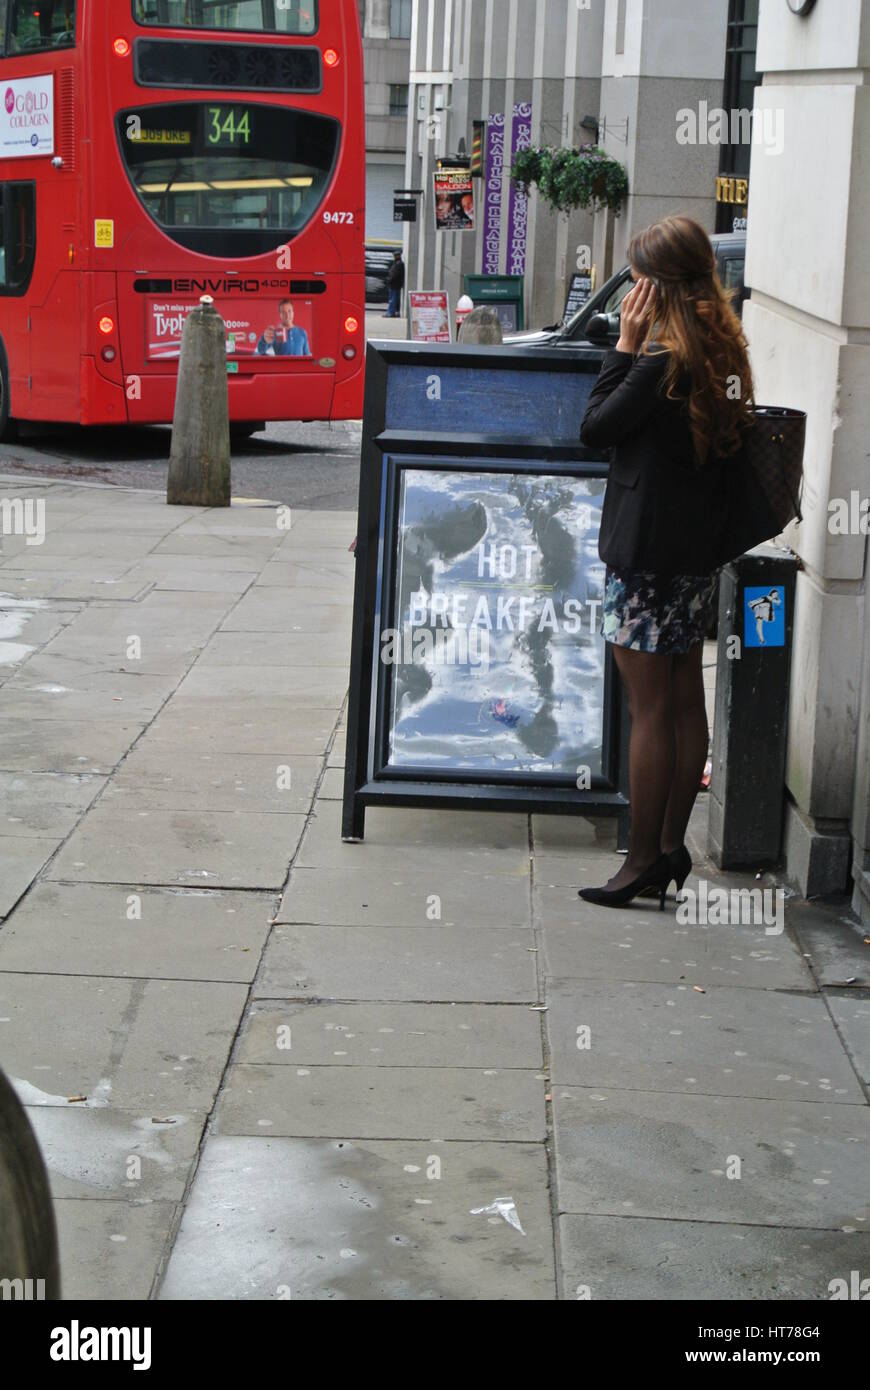 woman using phone next to A-Frame advertising Hot Breakfast, London Stock Photo